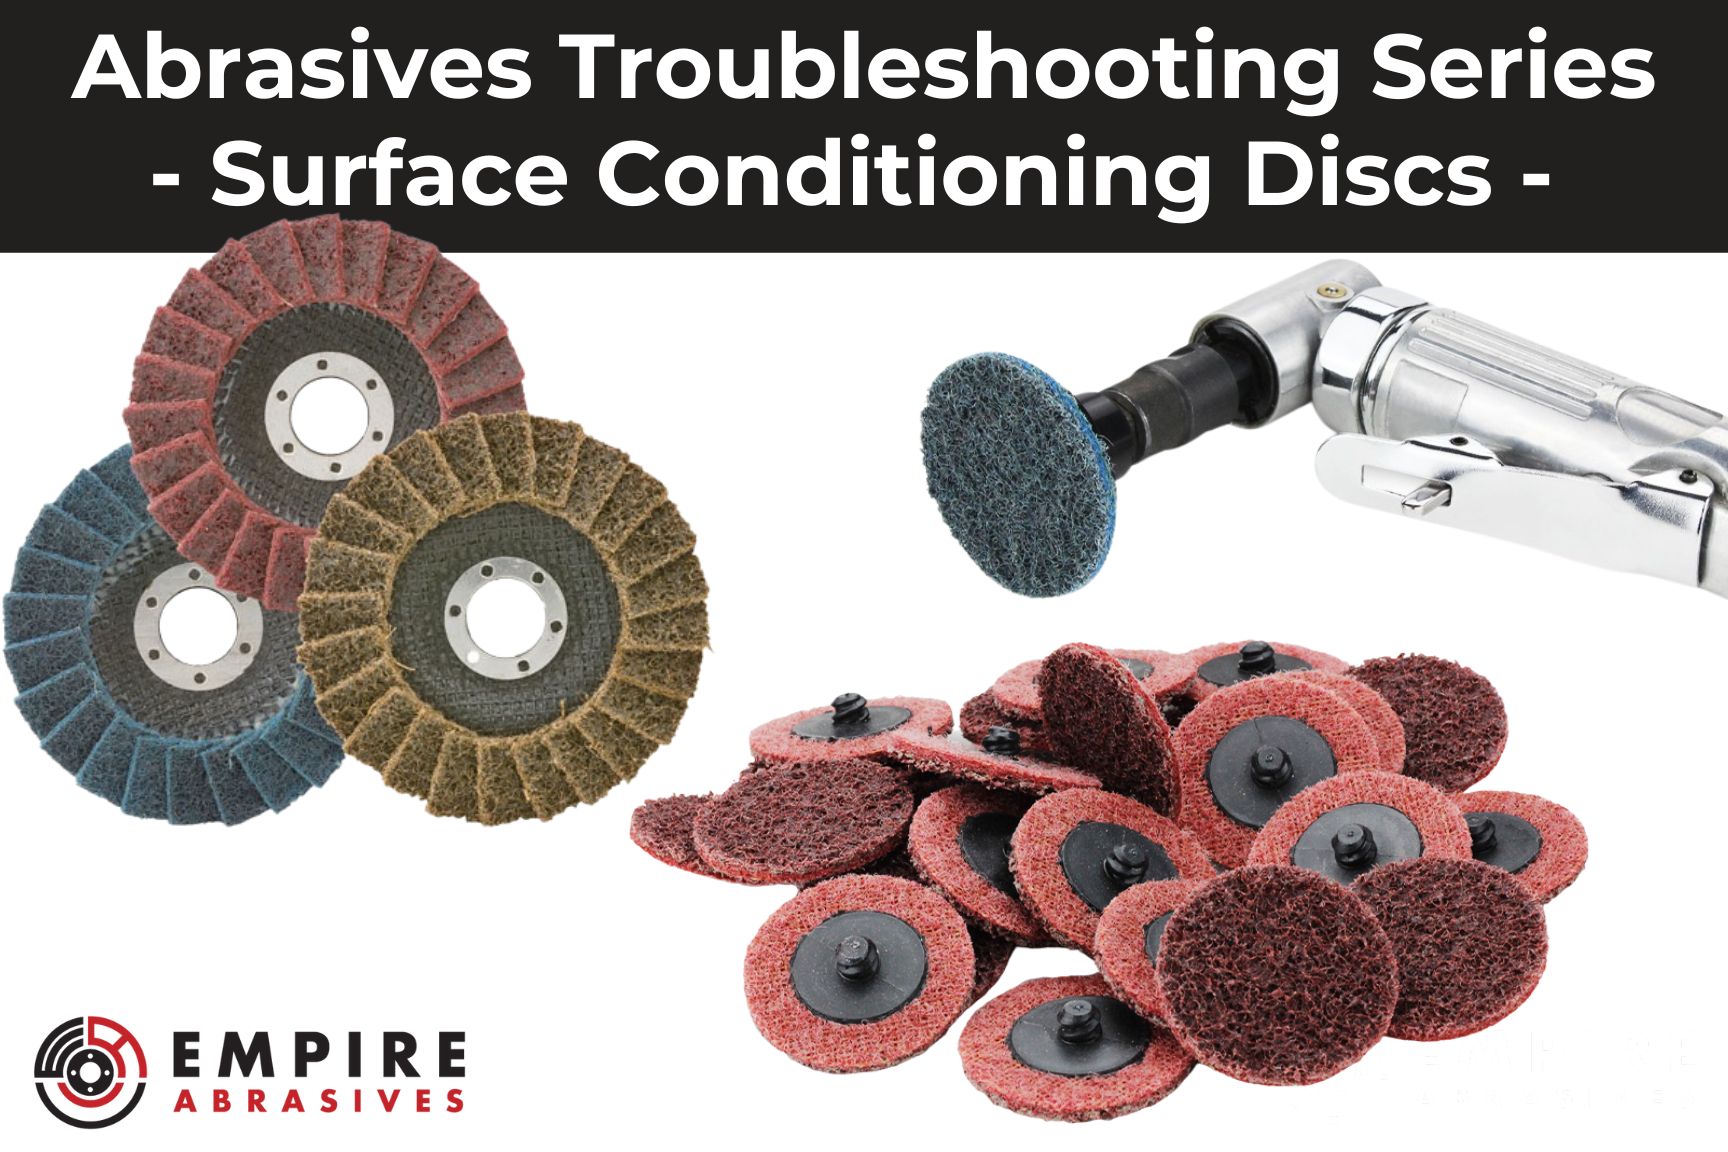 Empire Abrasives Troubleshooting Series: A variety of surface conditioning discs including non-woven, quick change, and flap disc types displayed alongside an air-powered abrasive tool